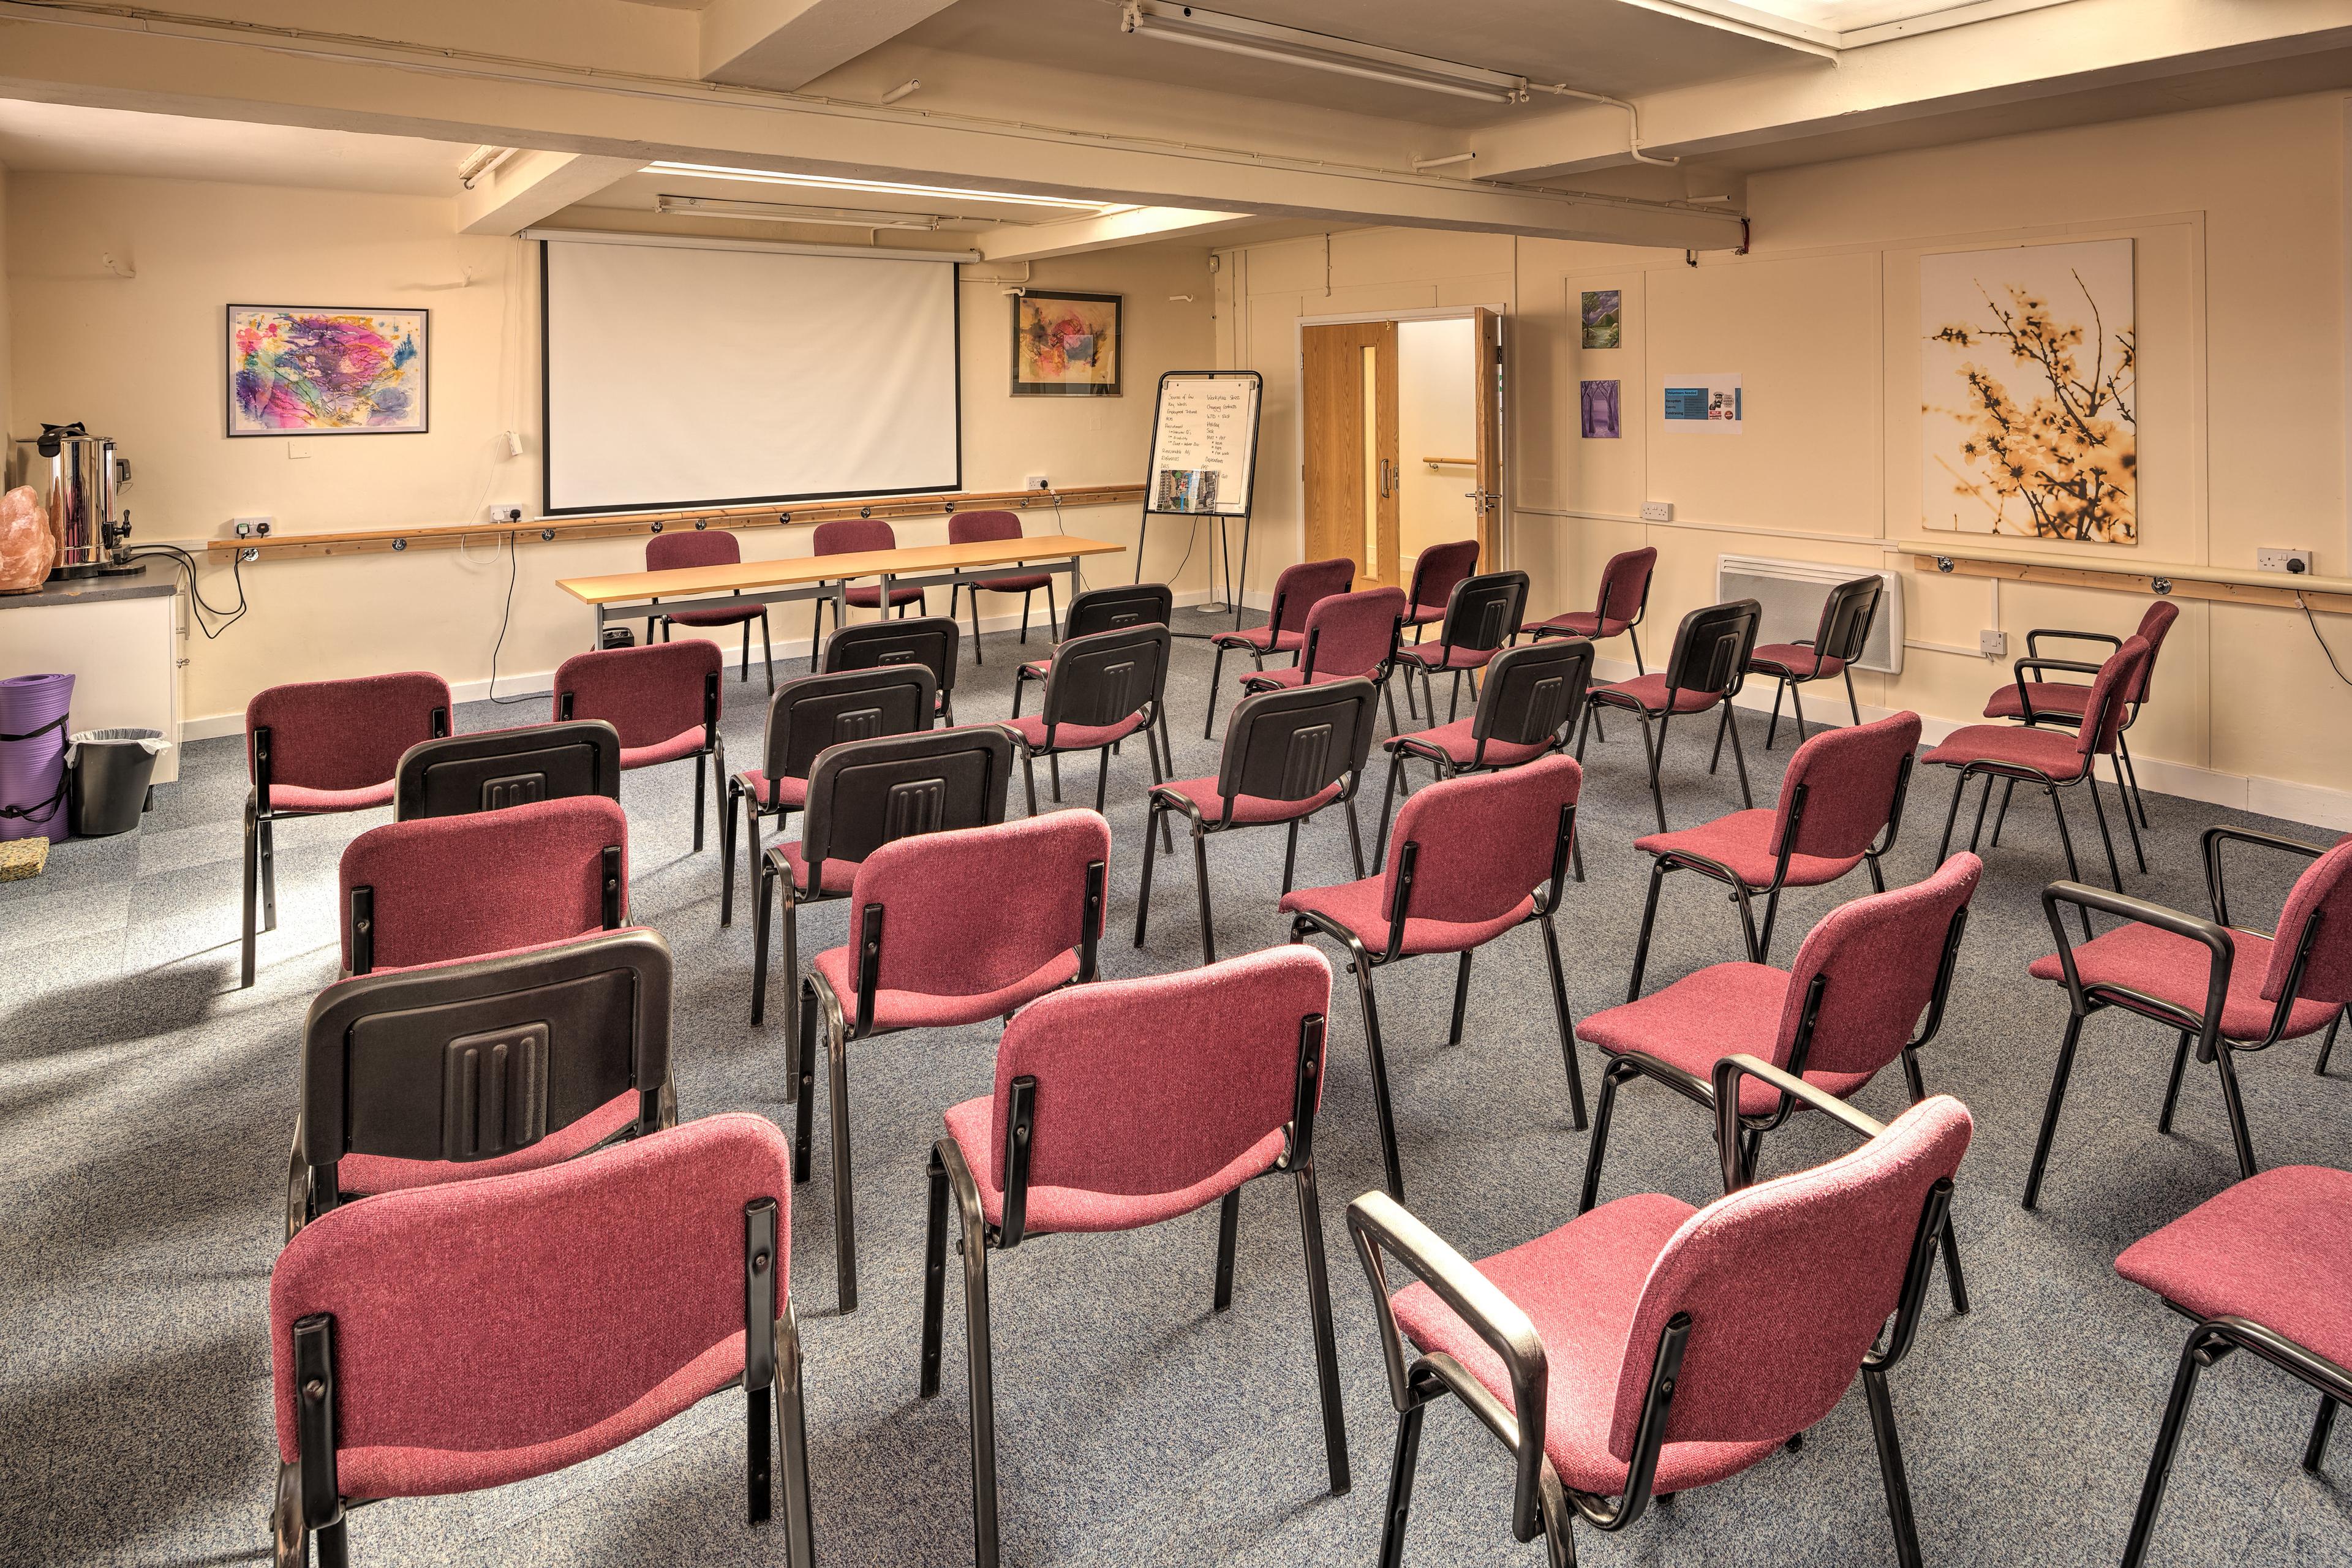 Meeting / Training Room, Ms Therapy Centre Norfolk photo #1